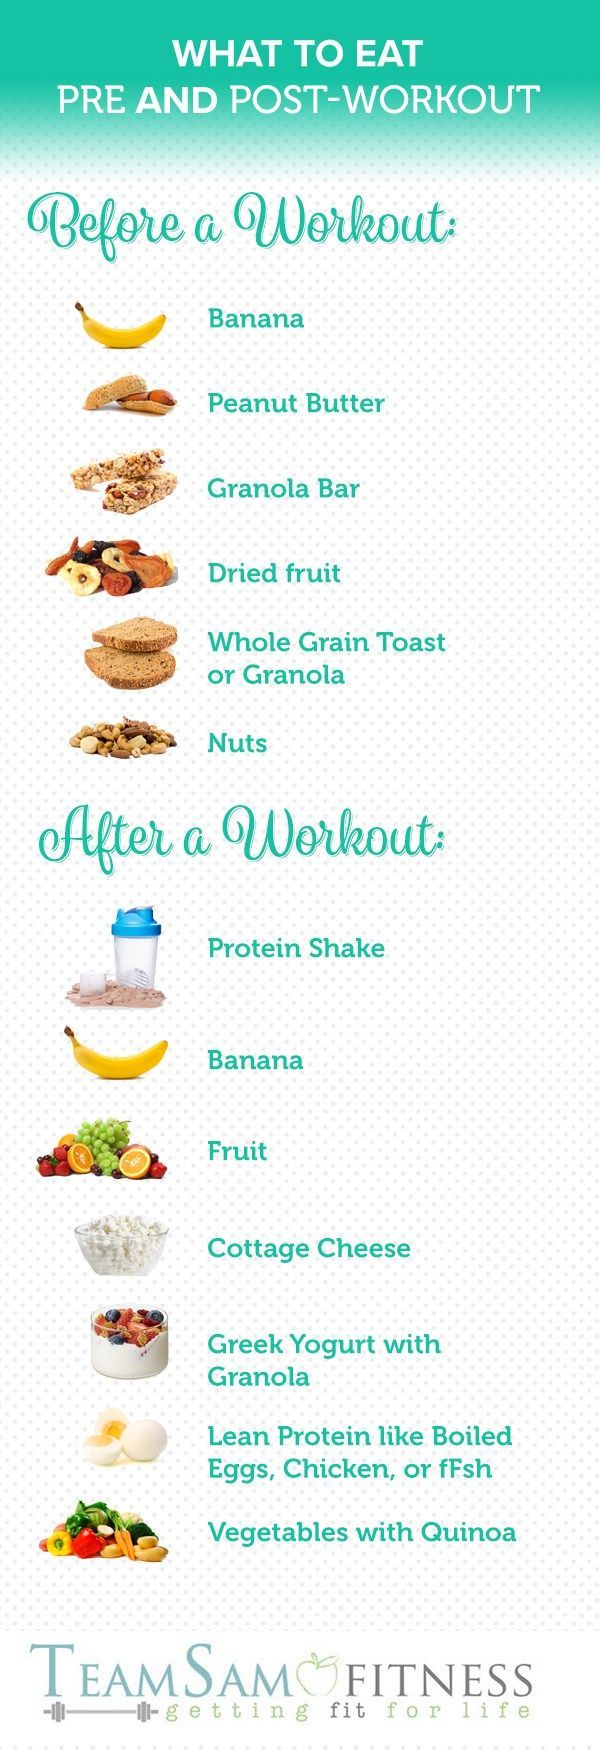 What to eat before and after a workout by TeamSam Fitness